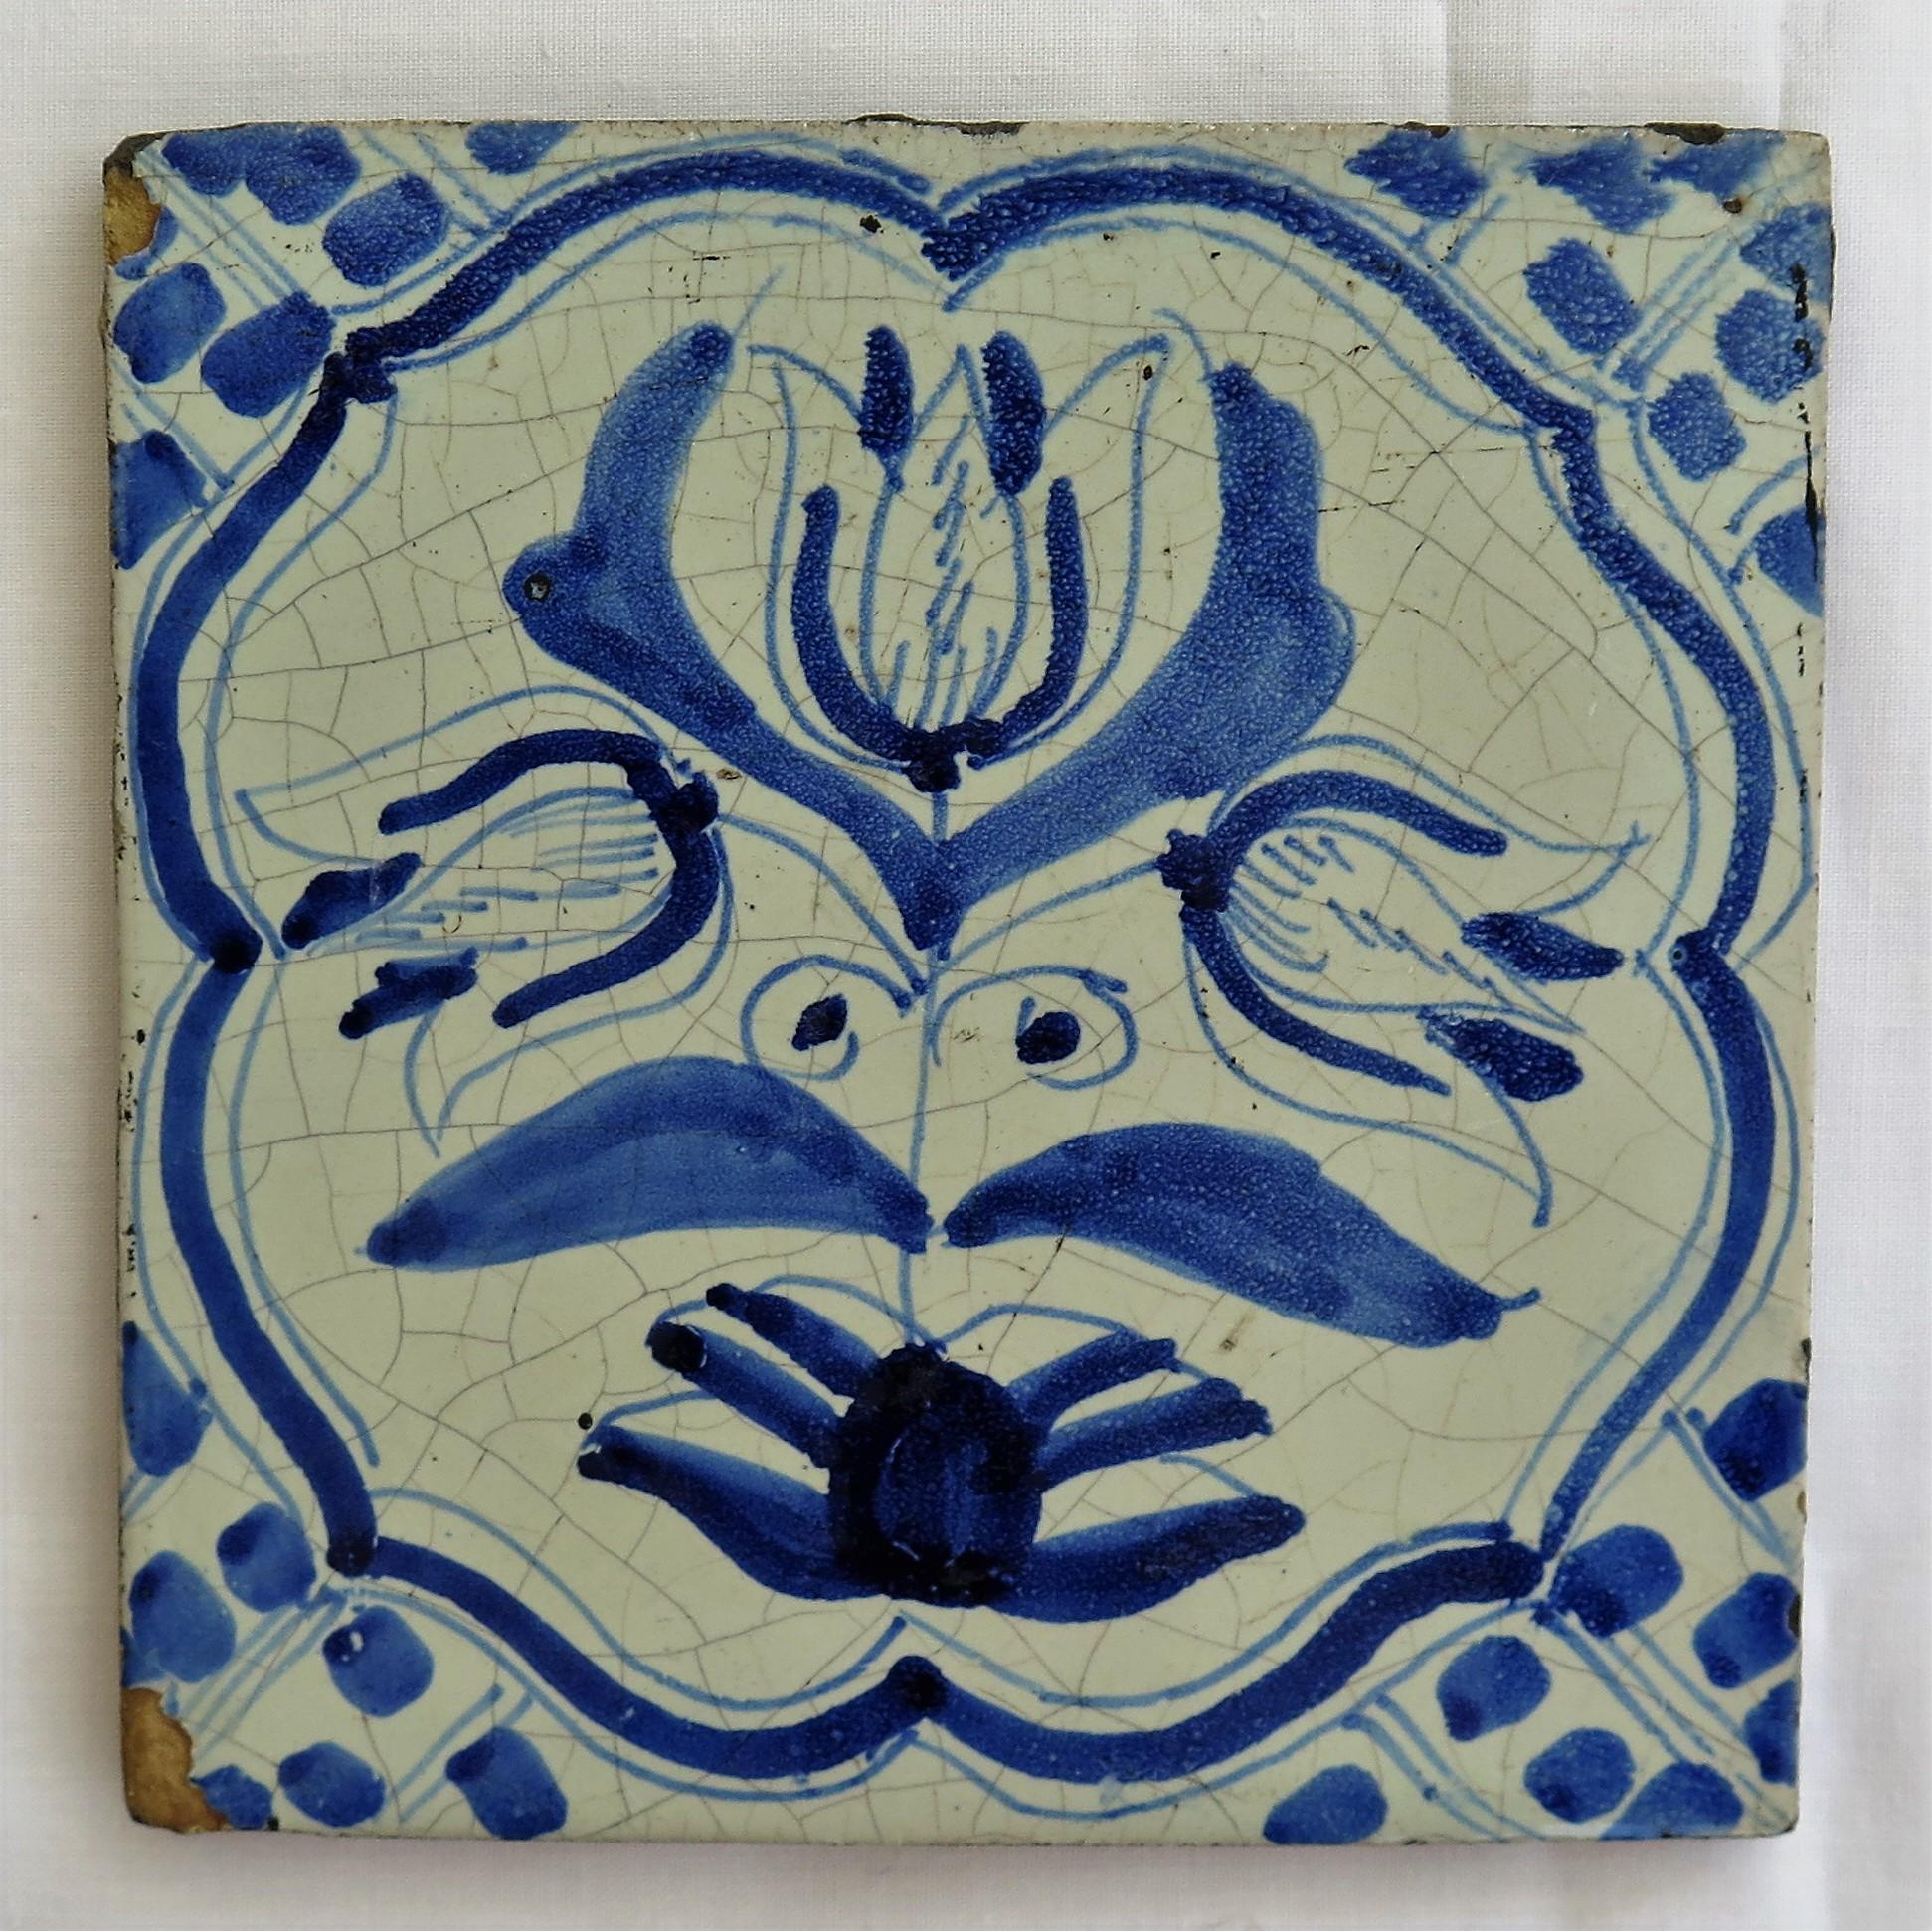 Hand-Painted Four 17th Century Delft Ceramic Wall Tiles Blue and White Tulip Pattern, Dutch